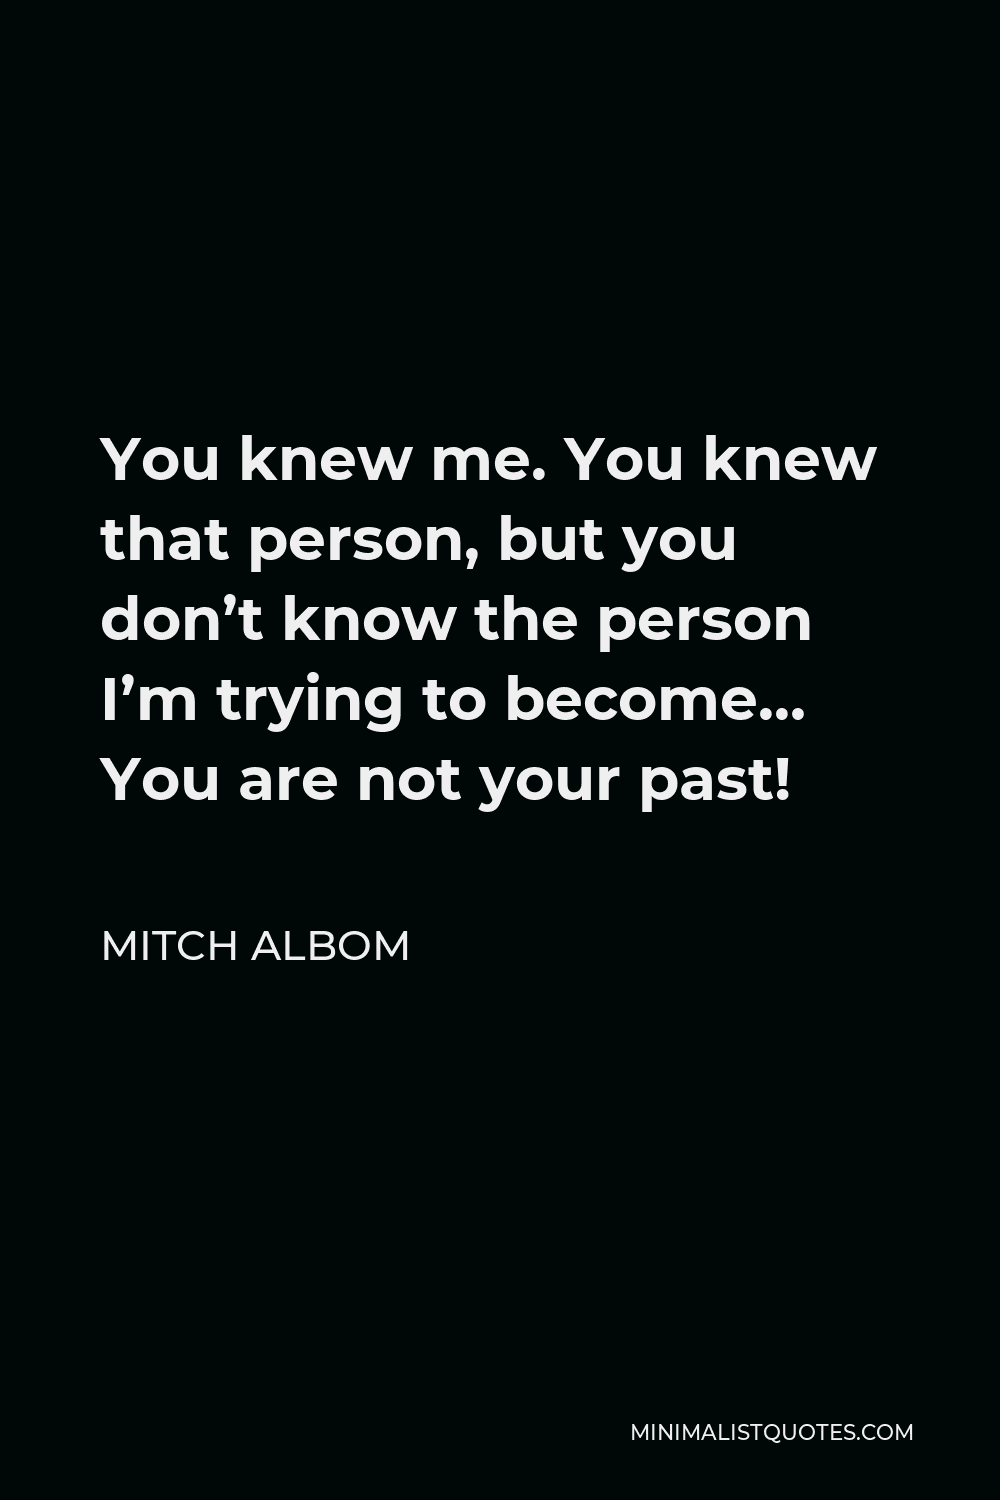 Mitch Albom Quote - You knew me. You knew that person, but you don’t know the person I’m trying to become… You are not your past!